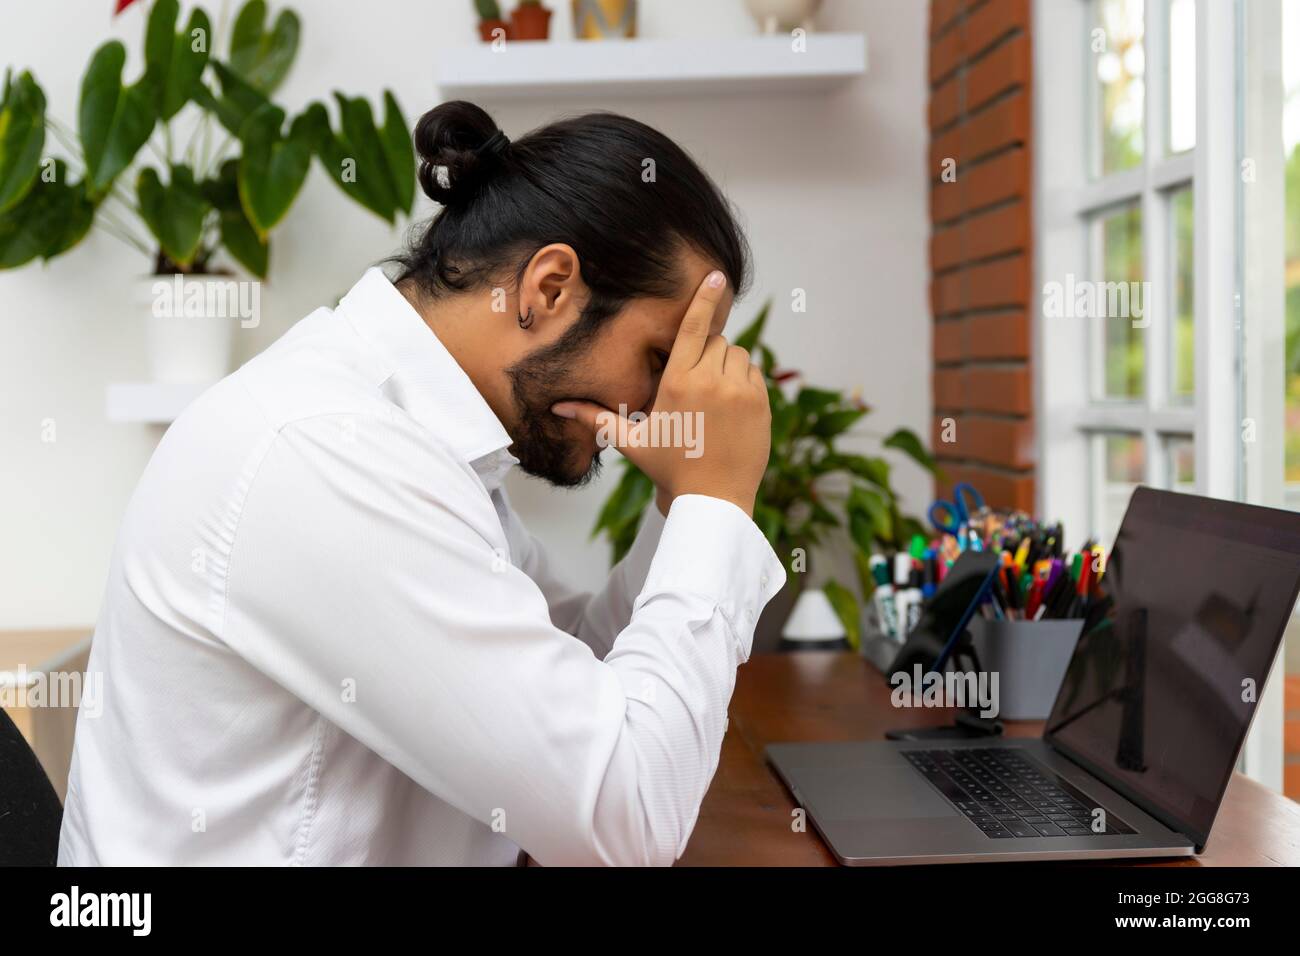 frustrated young man with long hair in front of a laptop. Stock Photo